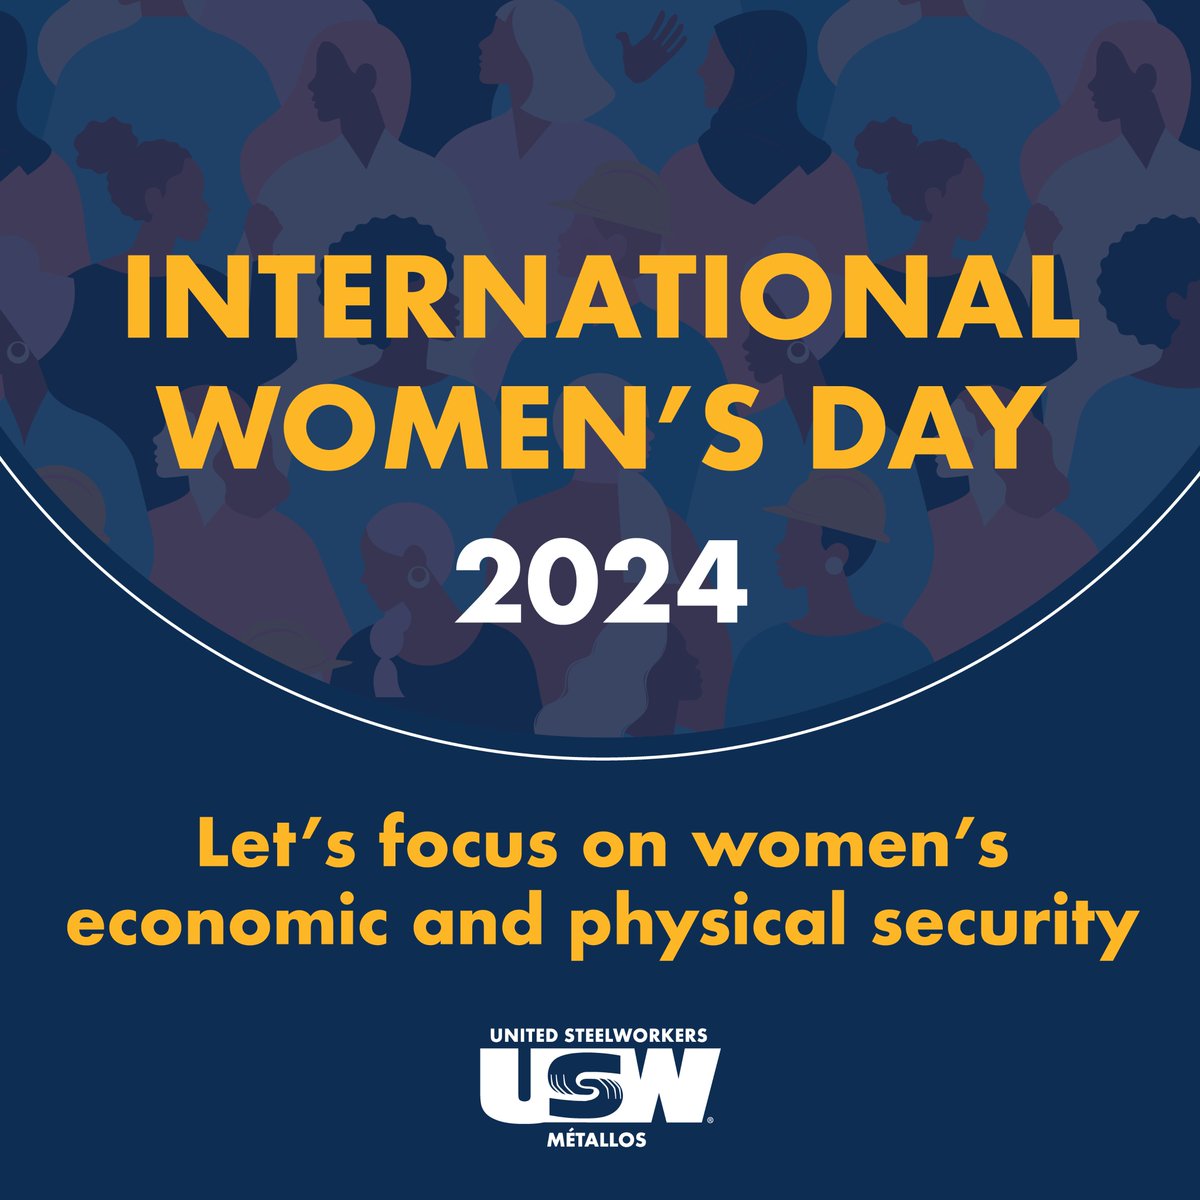 International Women’s Day is a chance to celebrate gains made by generations of women, girls, and female-identifying persons towards gender equity. And March 8 is also a time when we re-commit ourselves to take on the problems that remain. Full statement: usw.ca/lets-focus-on-…